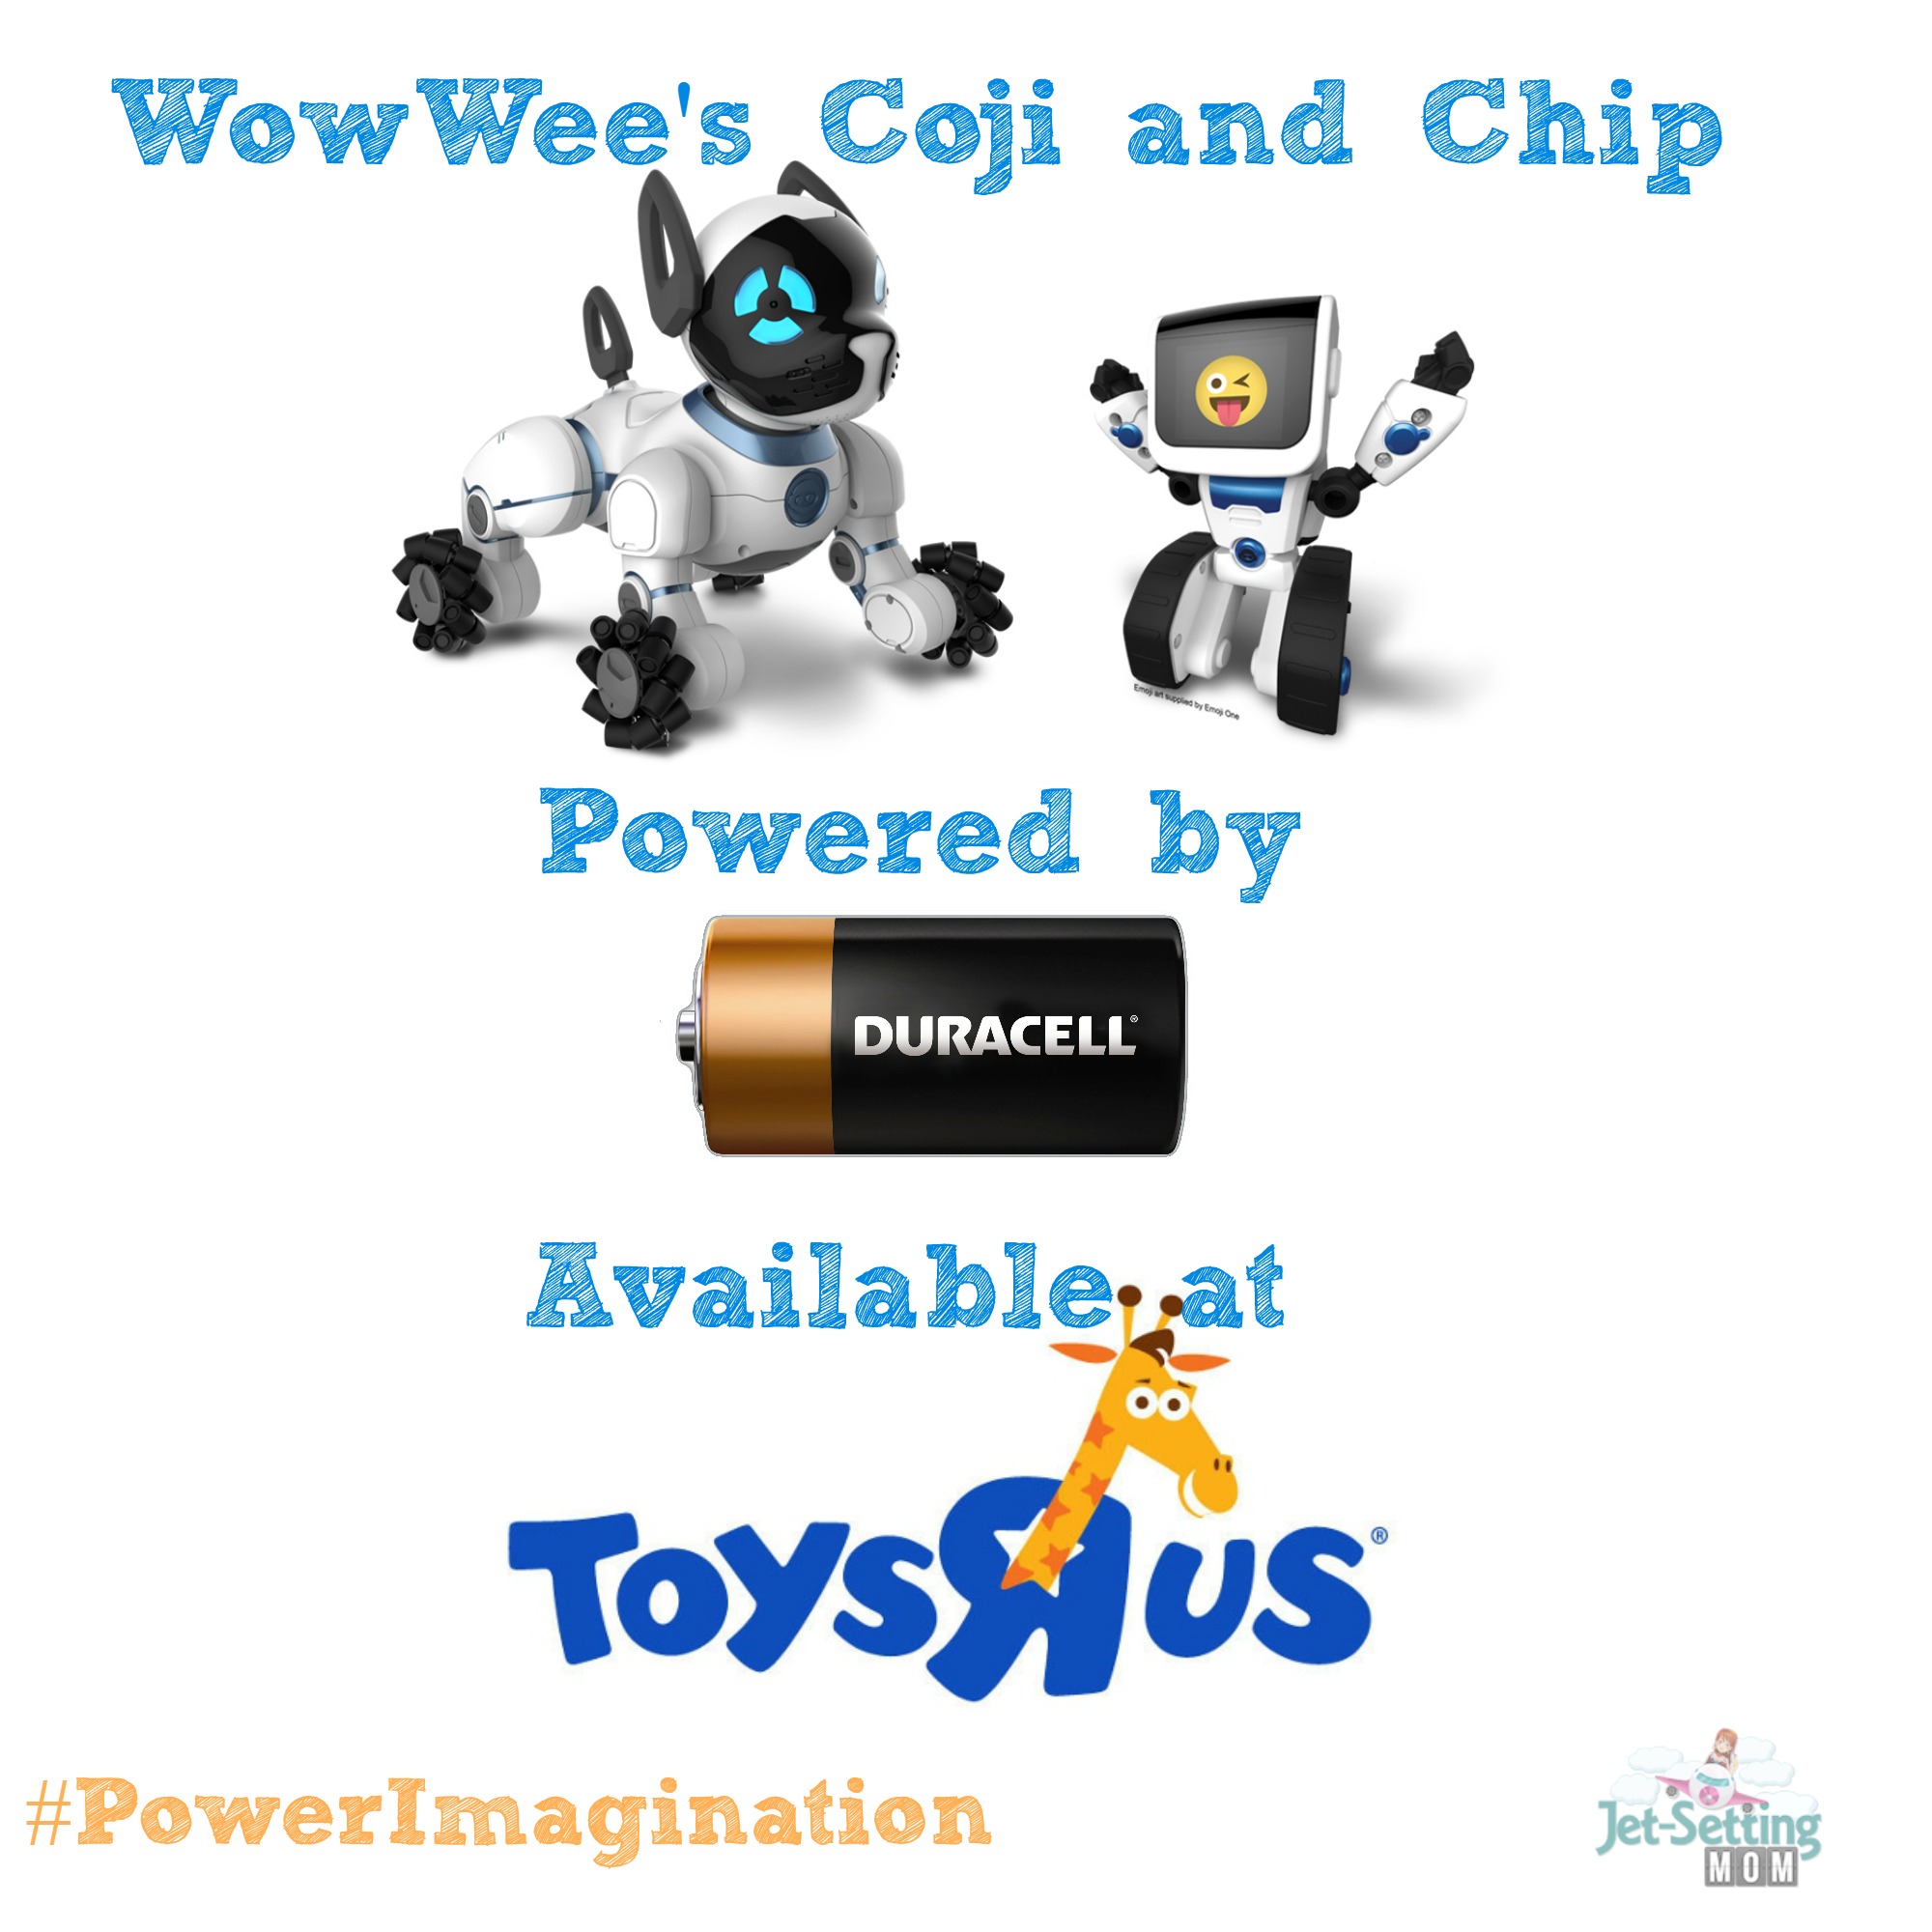 powerimagination-with-duracell-and-wowwees-chip-and-coji-toys-from-toys-r-us